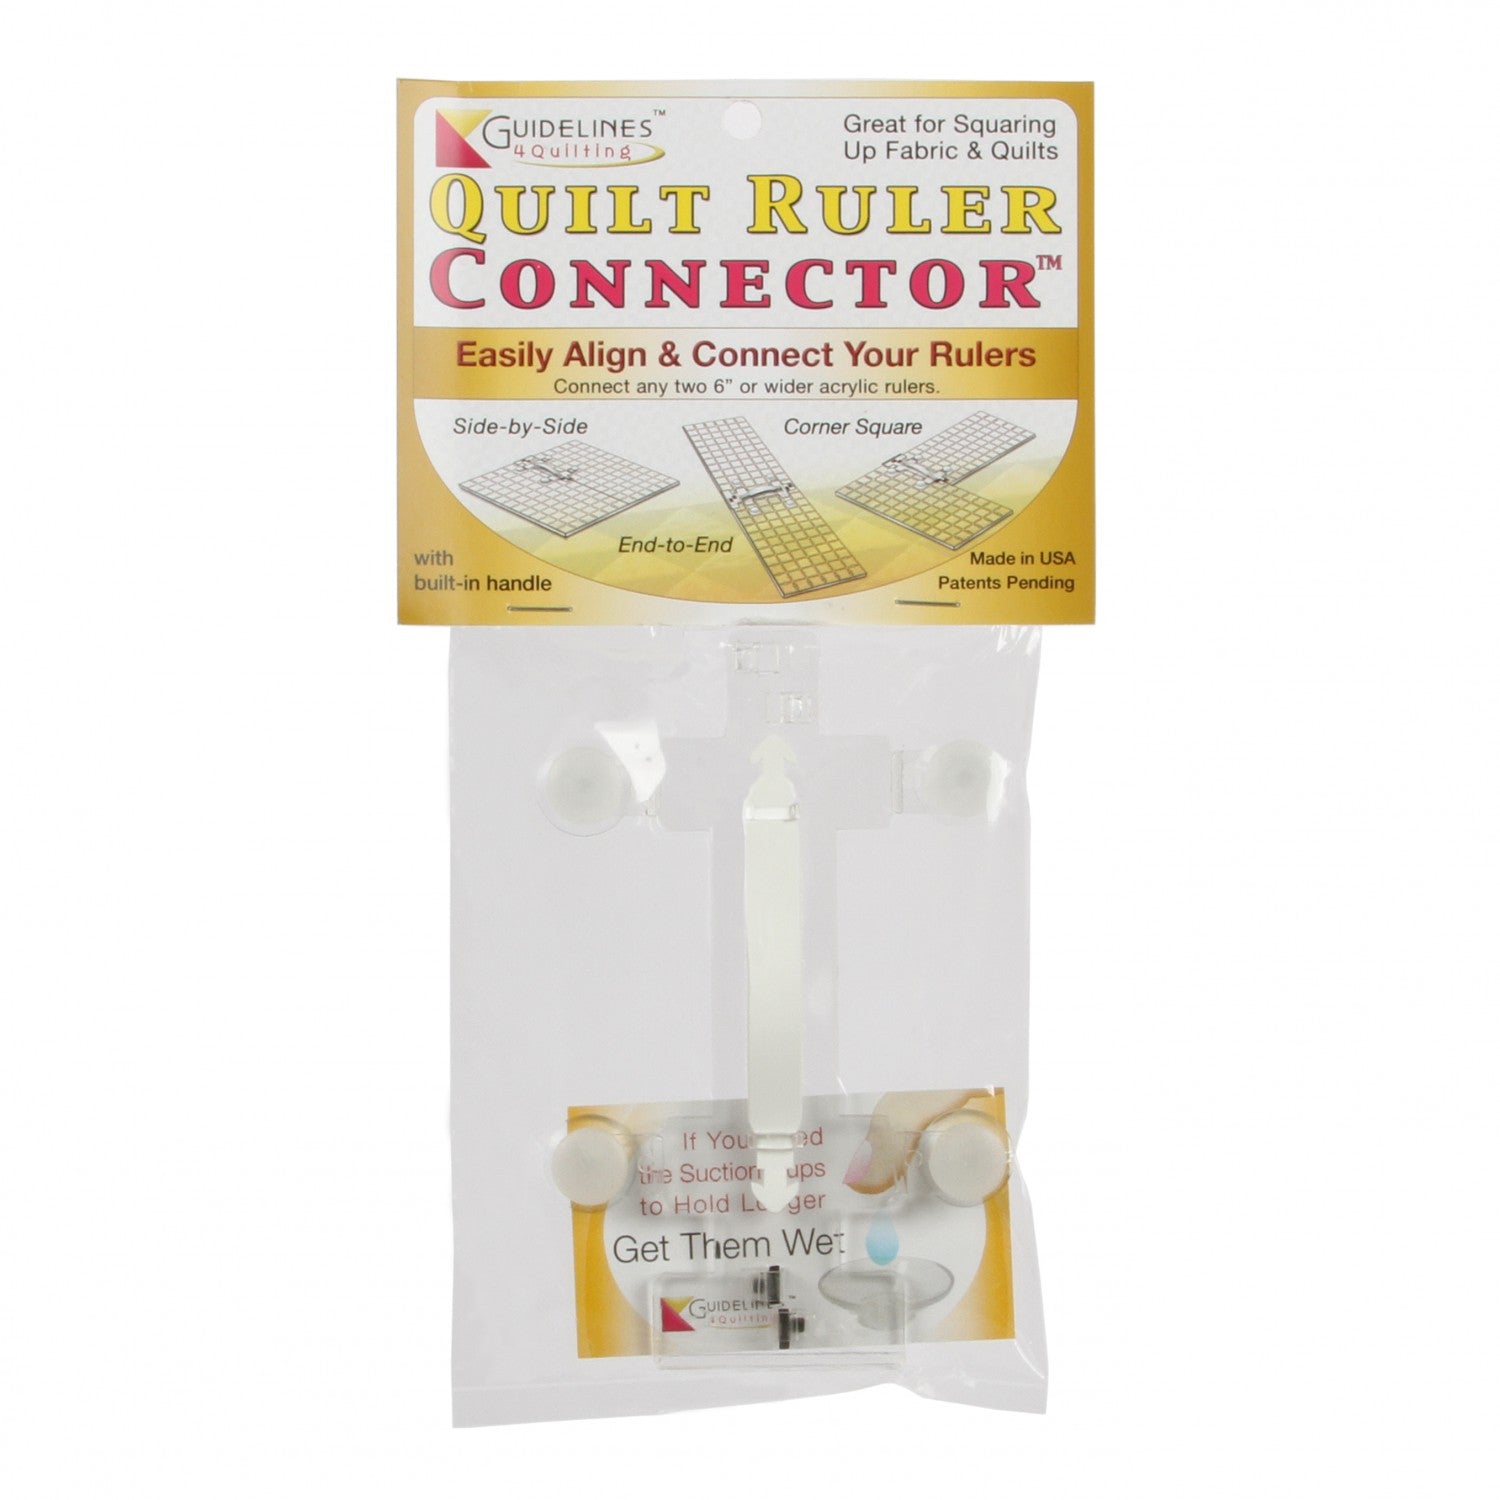 Quilt Ruler Connector for Any Two 6-Inch or Wider Acrylic Rulers by Guidelines4Quilting